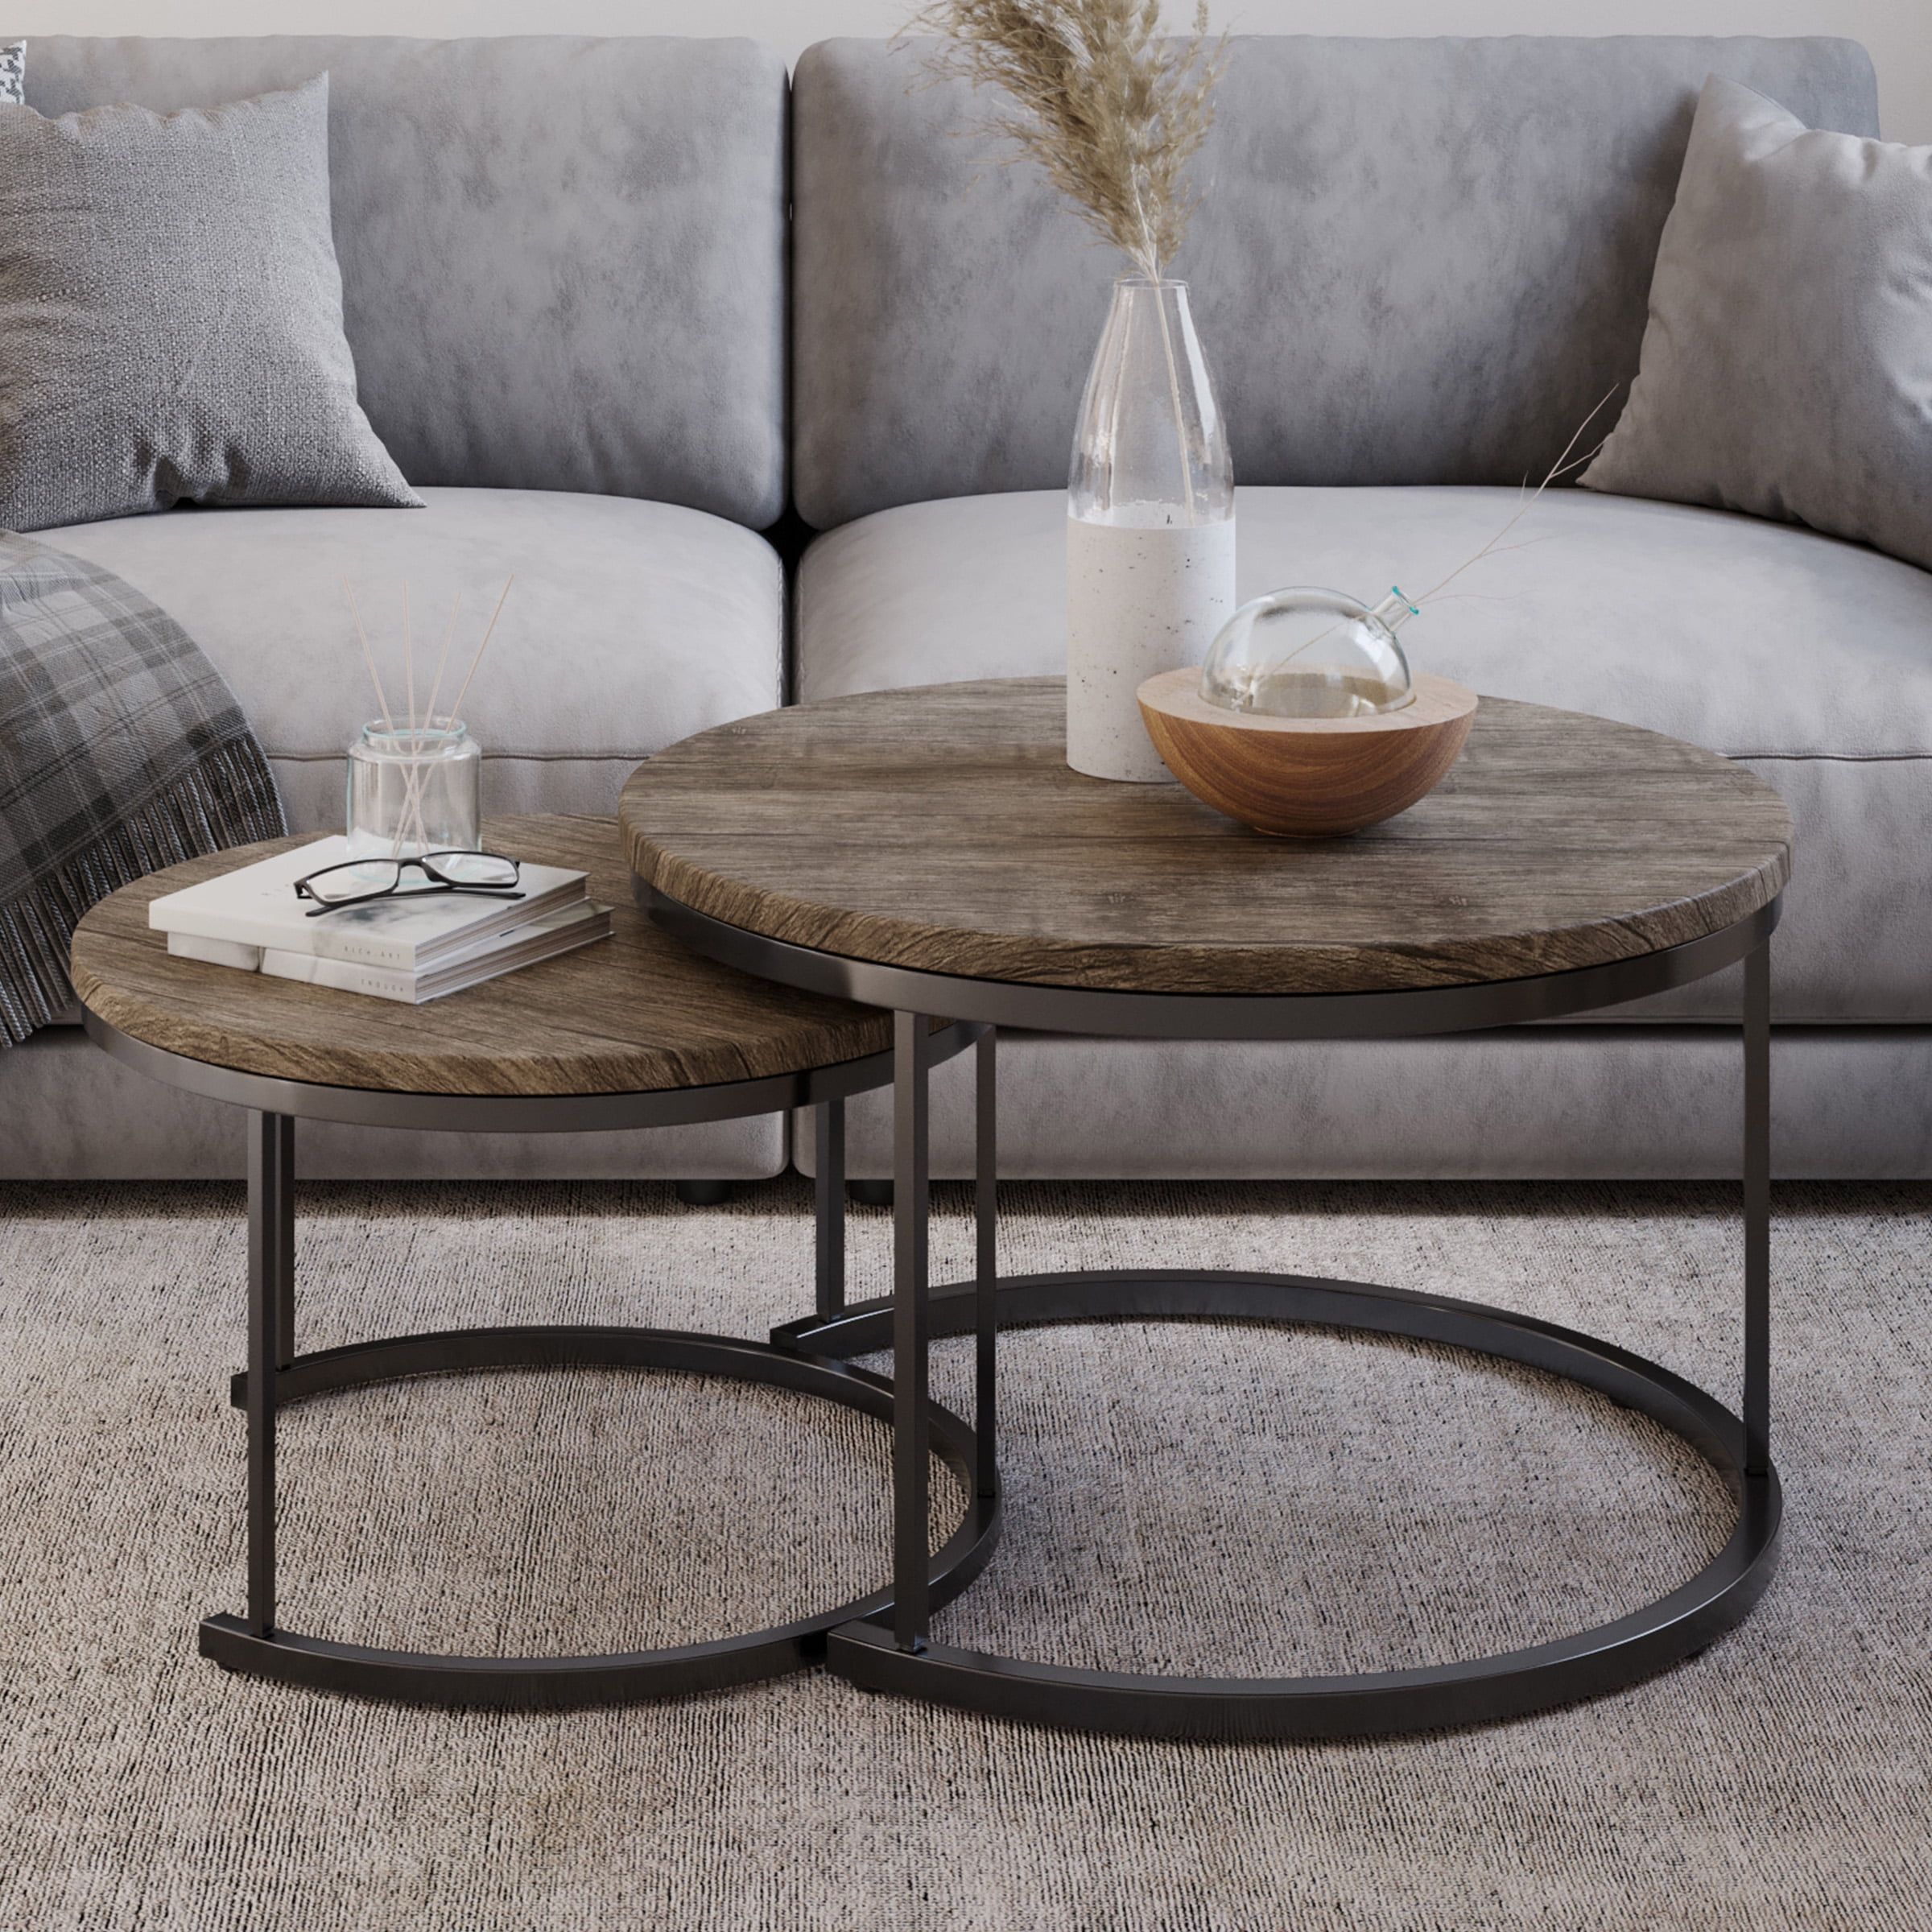 Lavish Home Round Coffee Table Set – 2 Piece Nesting Tables To Use Together  Or Separately – Modern Farmhouse Style (Gray Brown) – Walmart Inside Modern Nesting Coffee Tables (View 14 of 15)